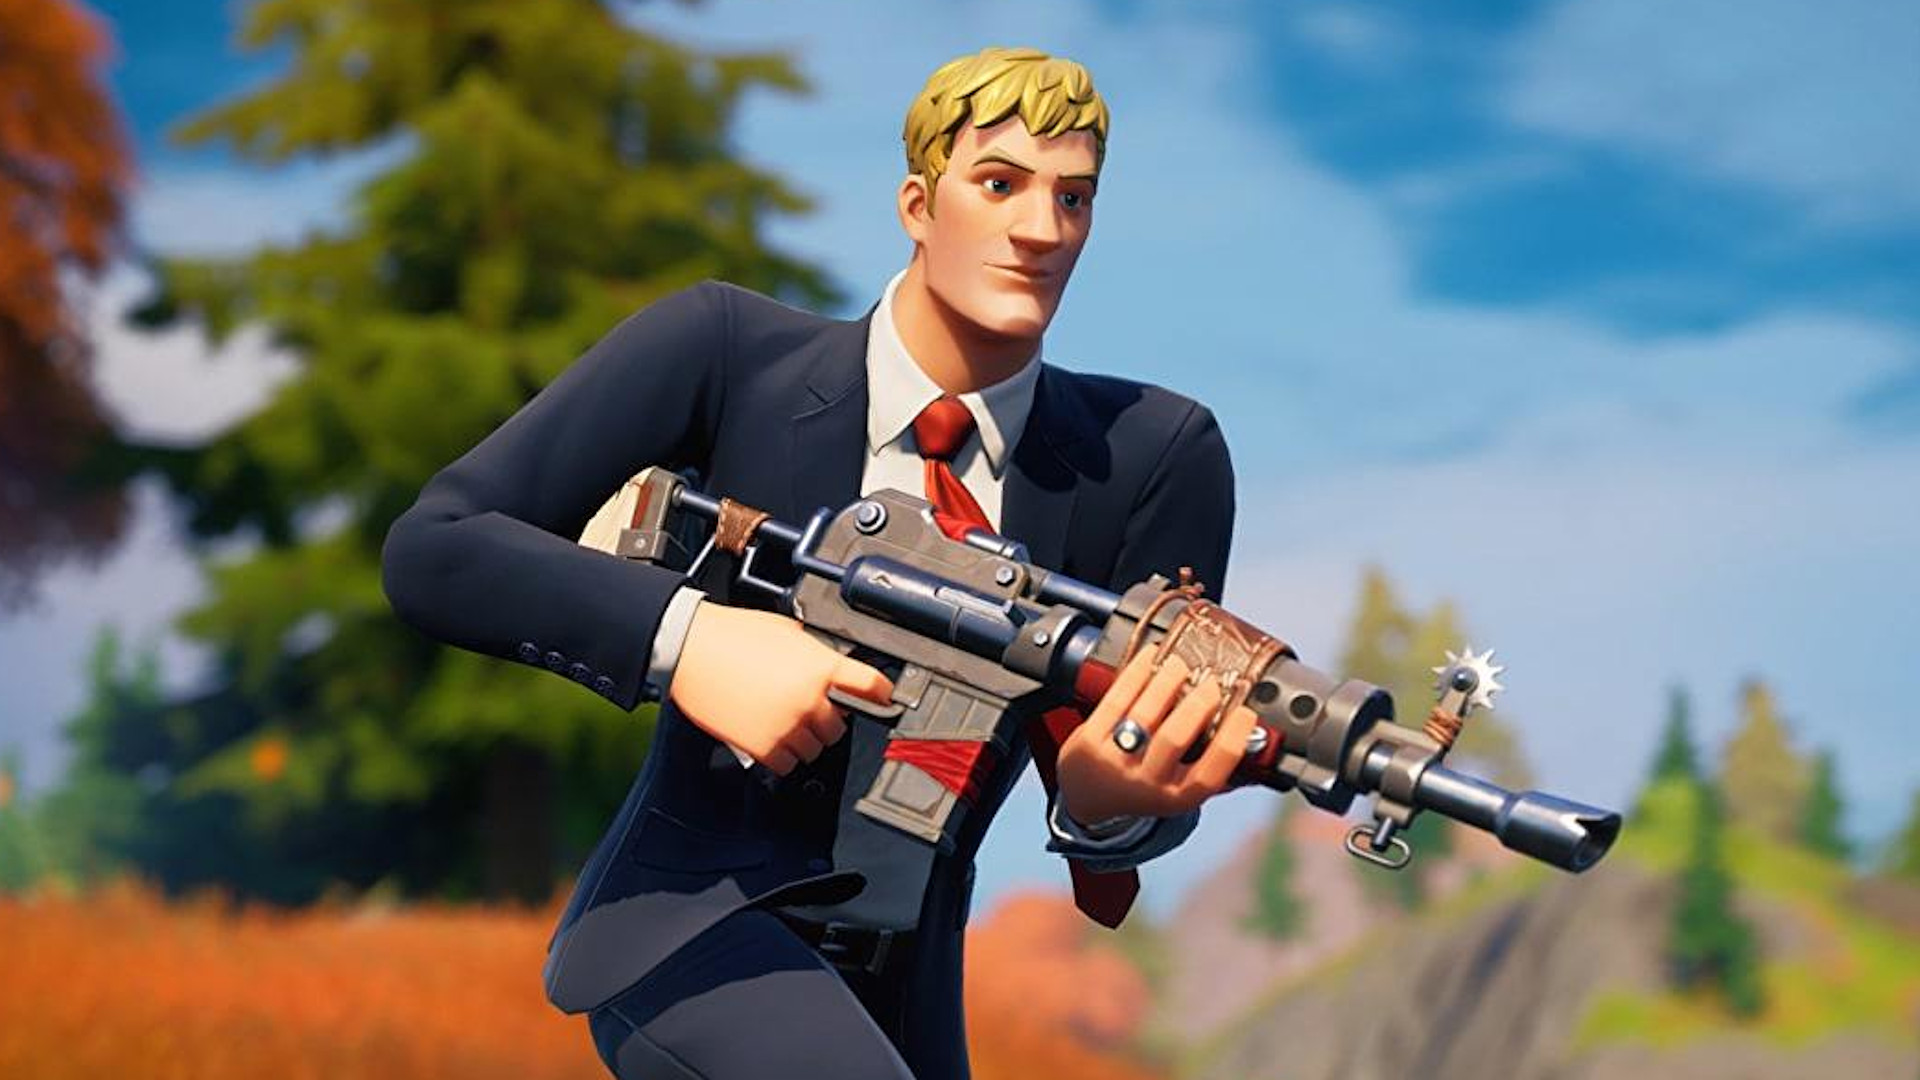 Fortnite' beats Apple's iOS ban with a little help from the Xbox cloud